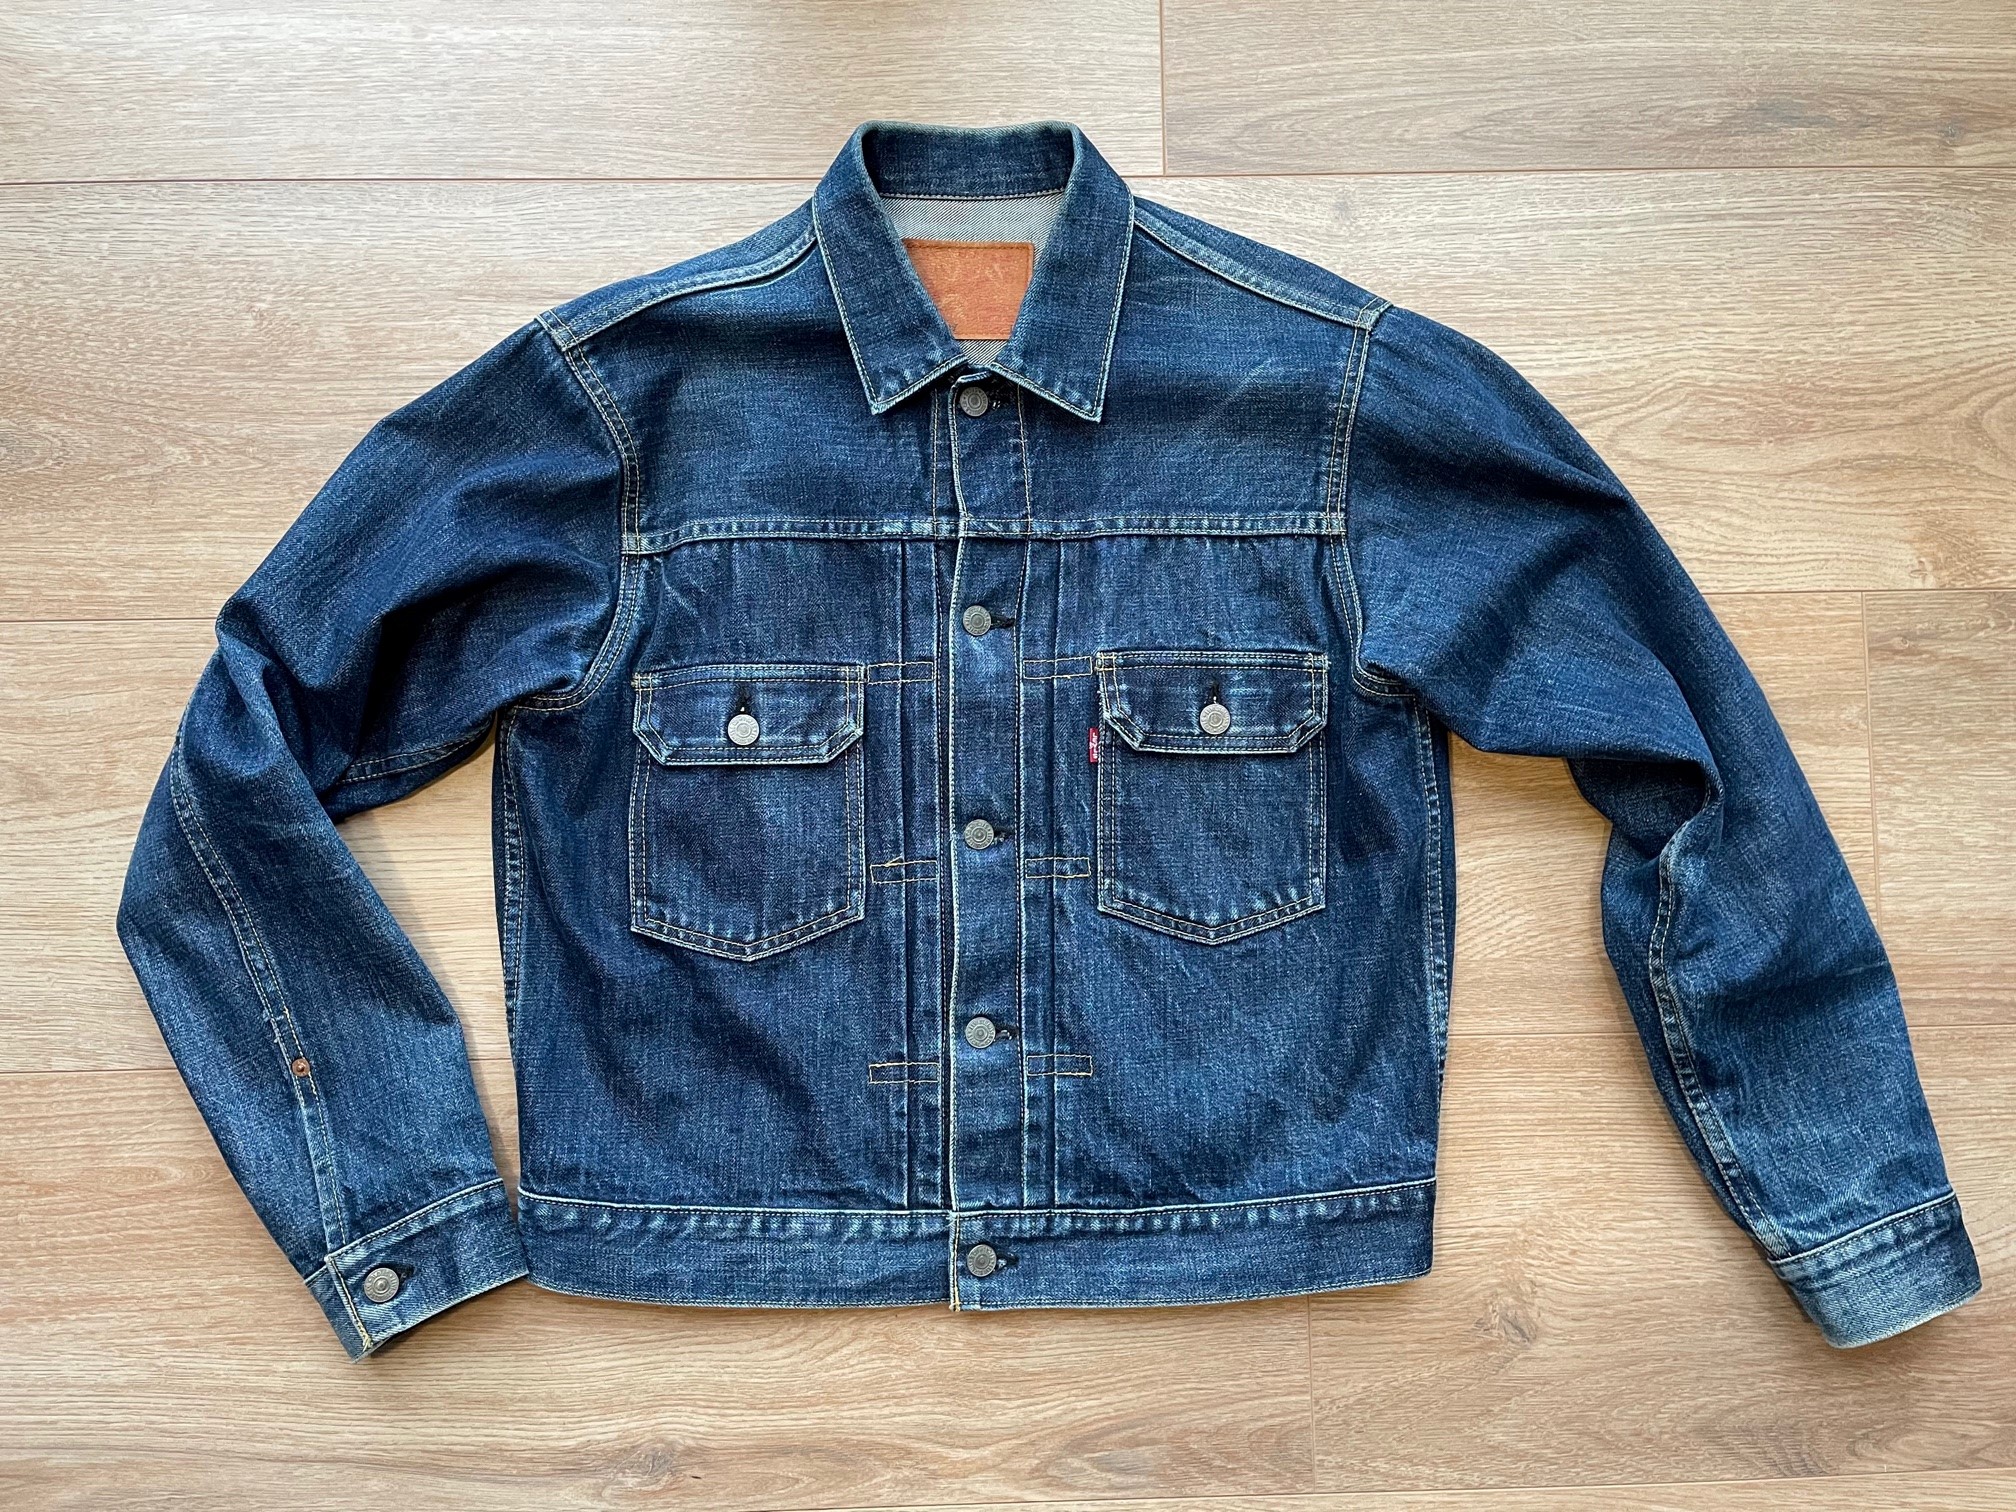 Type II jacket review x3. Denim, Roughout and waxed canvas/leather